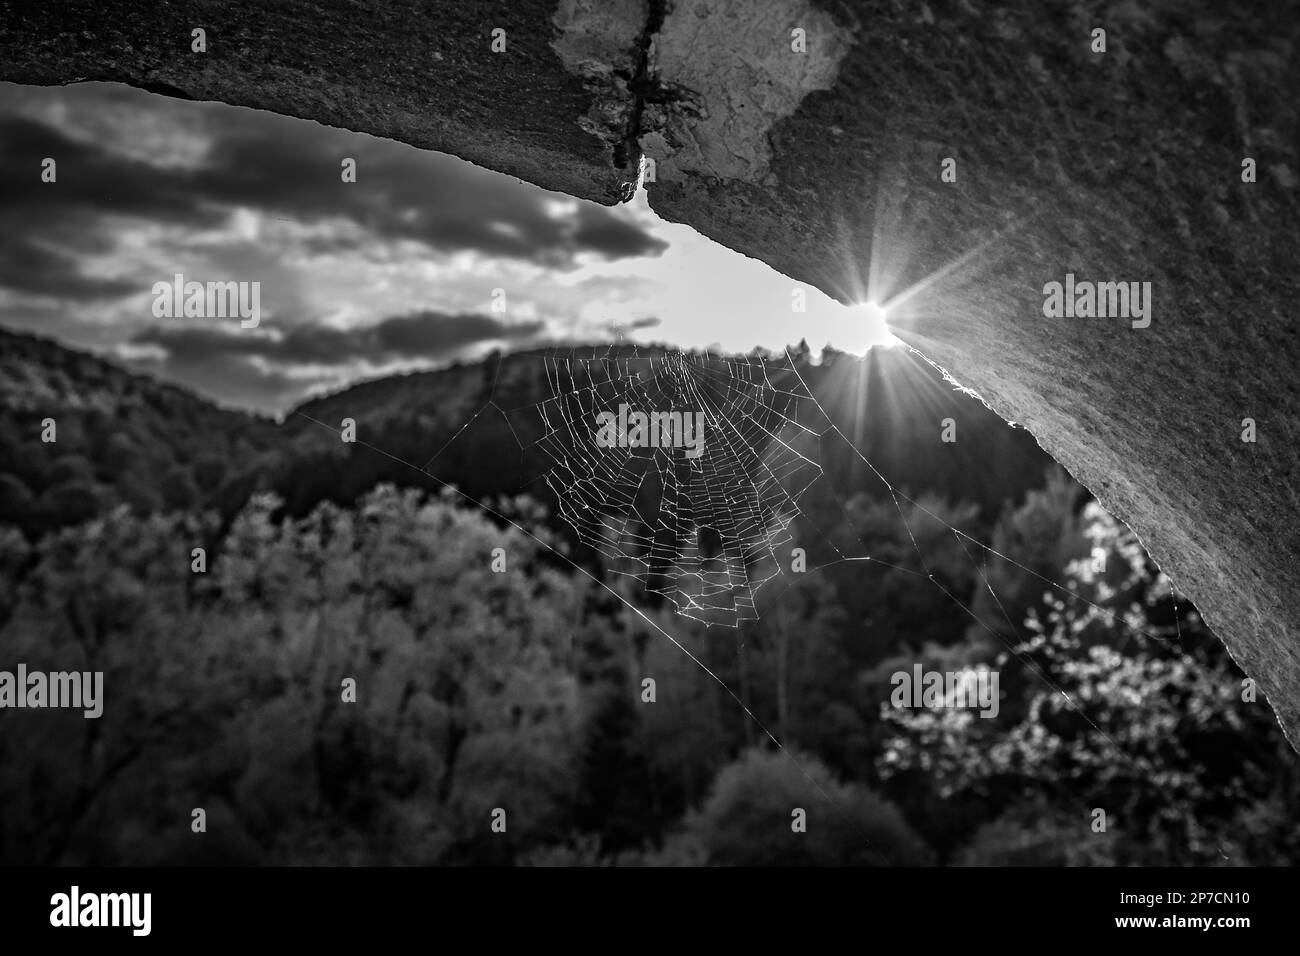 Black and white spider cobweb against the Sun, light diffraction, mountain in the background, shallow selective focus, dreamy mood Stock Photo